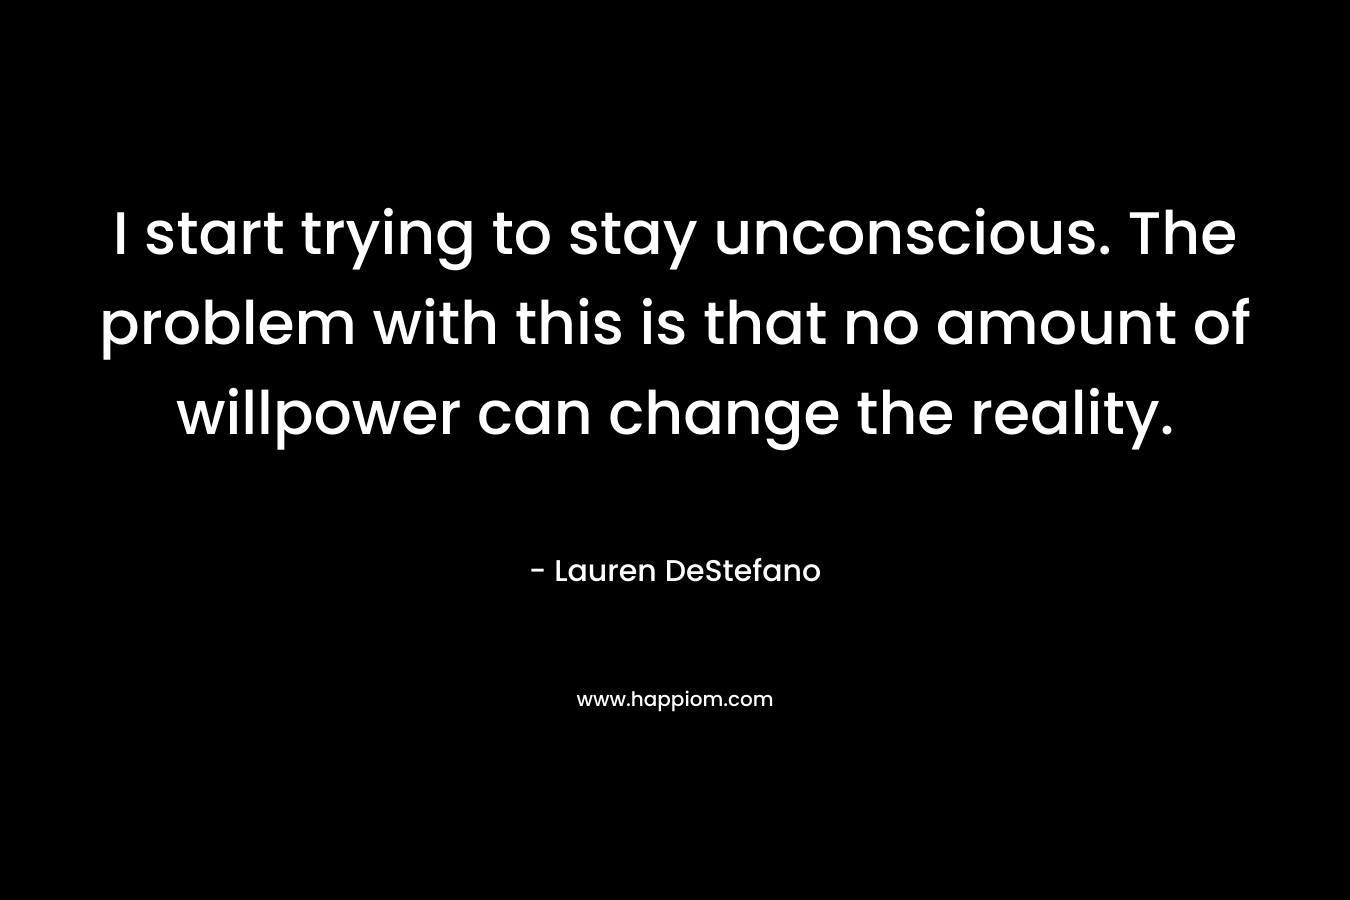 I start trying to stay unconscious. The problem with this is that no amount of willpower can change the reality.